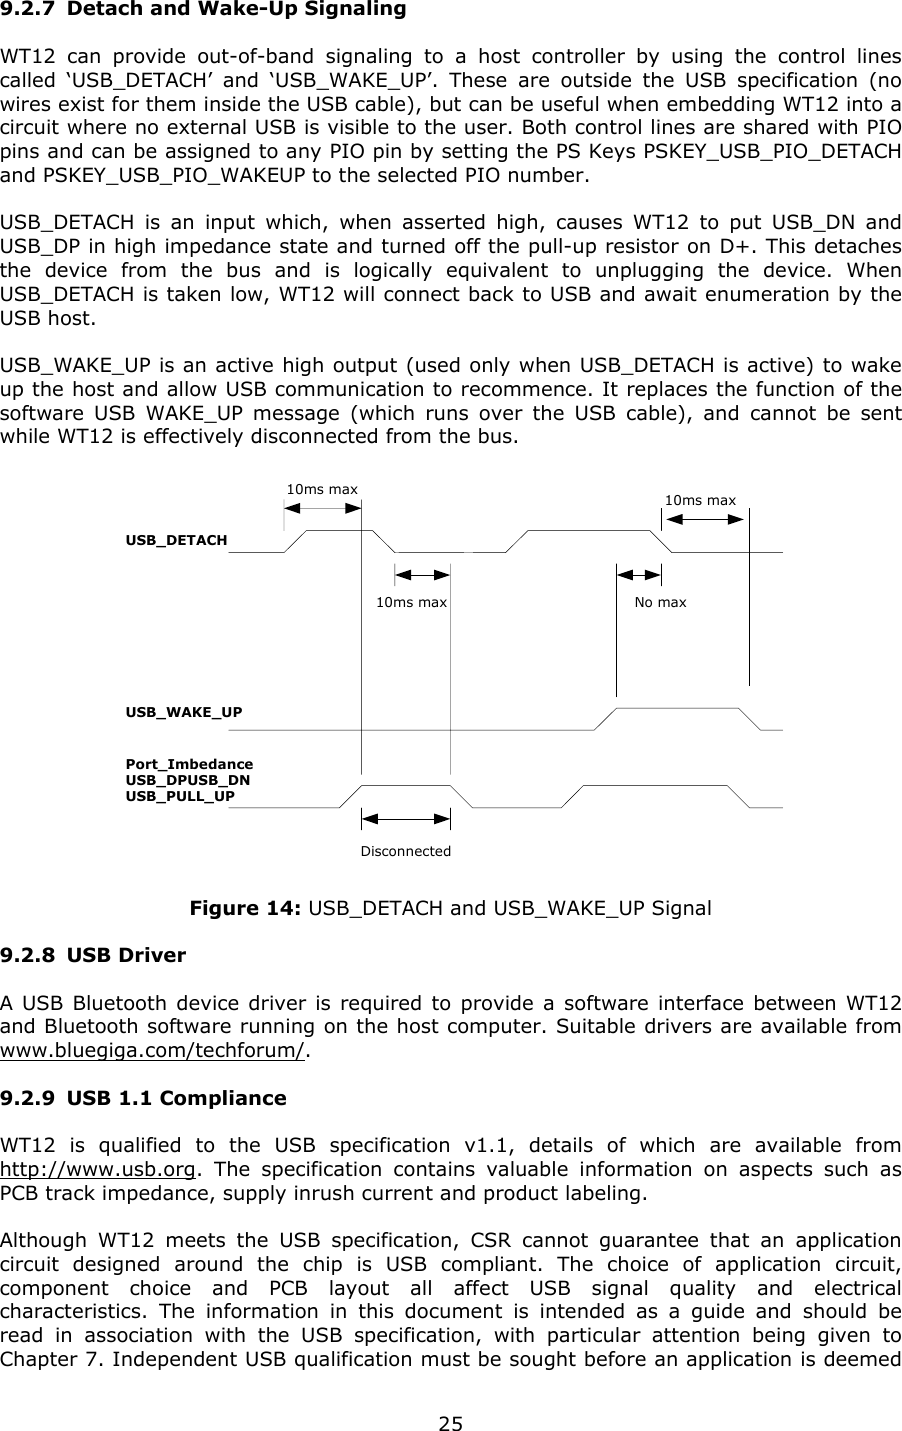   259.2.7 Detach and Wake-Up Signaling WT12 can provide out-of-band signaling to a host controller by using the control lines called ‘USB_DETACH’ and ‘USB_WAKE_UP’. These are outside the USB specification (no wires exist for them inside the USB cable), but can be useful when embedding WT12 into a circuit where no external USB is visible to the user. Both control lines are shared with PIO pins and can be assigned to any PIO pin by setting the PS Keys PSKEY_USB_PIO_DETACH and PSKEY_USB_PIO_WAKEUP to the selected PIO number. USB_DETACH is an input which, when asserted high, causes WT12 to put USB_DN and USB_DP in high impedance state and turned off the pull-up resistor on D+. This detaches the device from the bus and is logically equivalent to unplugging the device. When USB_DETACH is taken low, WT12 will connect back to USB and await enumeration by the USB host. USB_WAKE_UP is an active high output (used only when USB_DETACH is active) to wake up the host and allow USB communication to recommence. It replaces the function of the software USB WAKE_UP message (which runs over the USB cable), and cannot be sent while WT12 is effectively disconnected from the bus. USB_WAKE_UPUSB_DETACHPort_ImbedanceUSB_DPUSB_DNUSB_PULL_UP10ms max10ms max 10ms maxNo maxDisconnected Figure 14: USB_DETACH and USB_WAKE_UP Signal 9.2.8 USB Driver A USB Bluetooth device driver is required to provide a software interface between WT12 and Bluetooth software running on the host computer. Suitable drivers are available from www.bluegiga.com/techforum/. 9.2.9 USB 1.1 Compliance WT12 is qualified to the USB specification v1.1, details of which are available from http://www.usb.org. The specification contains valuable information on aspects such as PCB track impedance, supply inrush current and product labeling. Although WT12 meets the USB specification, CSR cannot guarantee that an application circuit designed around the chip is USB compliant. The choice of application circuit, component choice and PCB layout all affect USB signal quality and electrical characteristics. The information in this document is intended as a guide and should be read in association with the USB specification, with particular attention being given to Chapter 7. Independent USB qualification must be sought before an application is deemed 